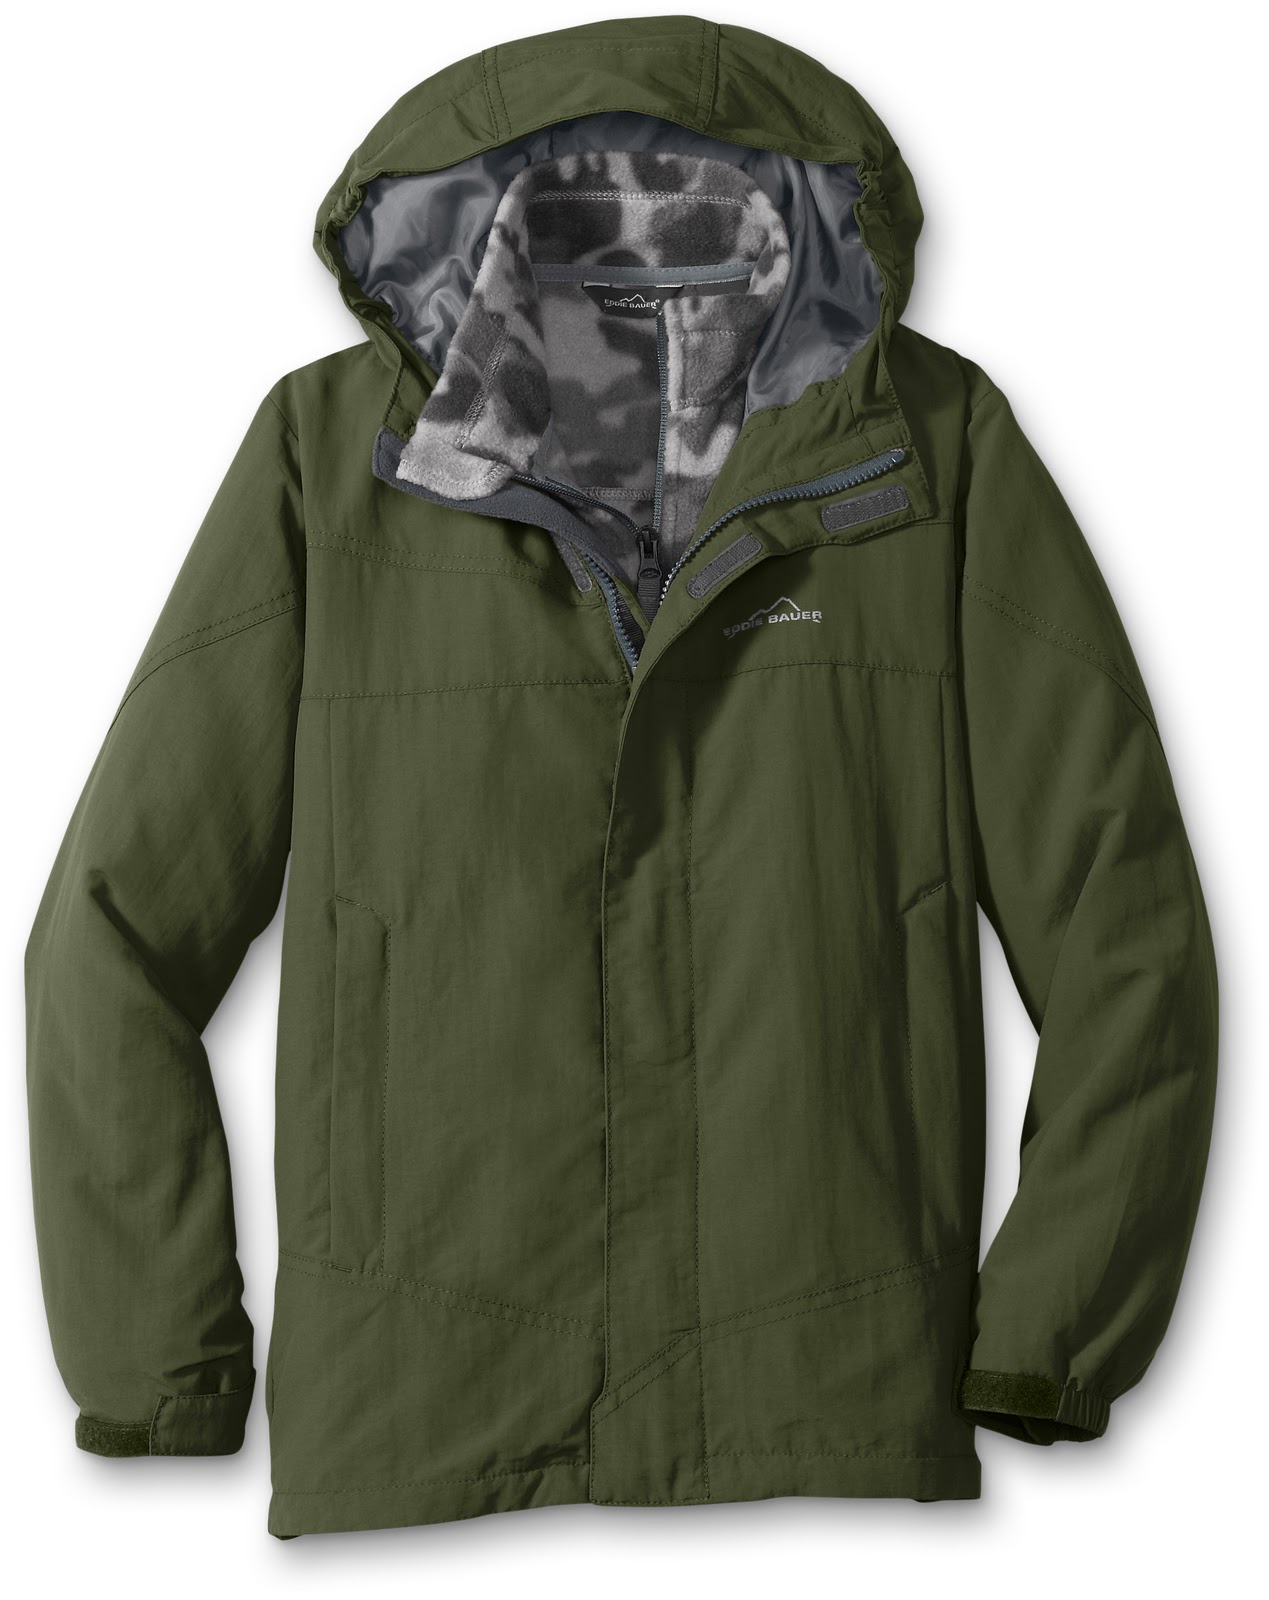 Eddie Bauer Boys' 3-in-1 Snowfoil Jacket Review - Outnumbered 3 to 1